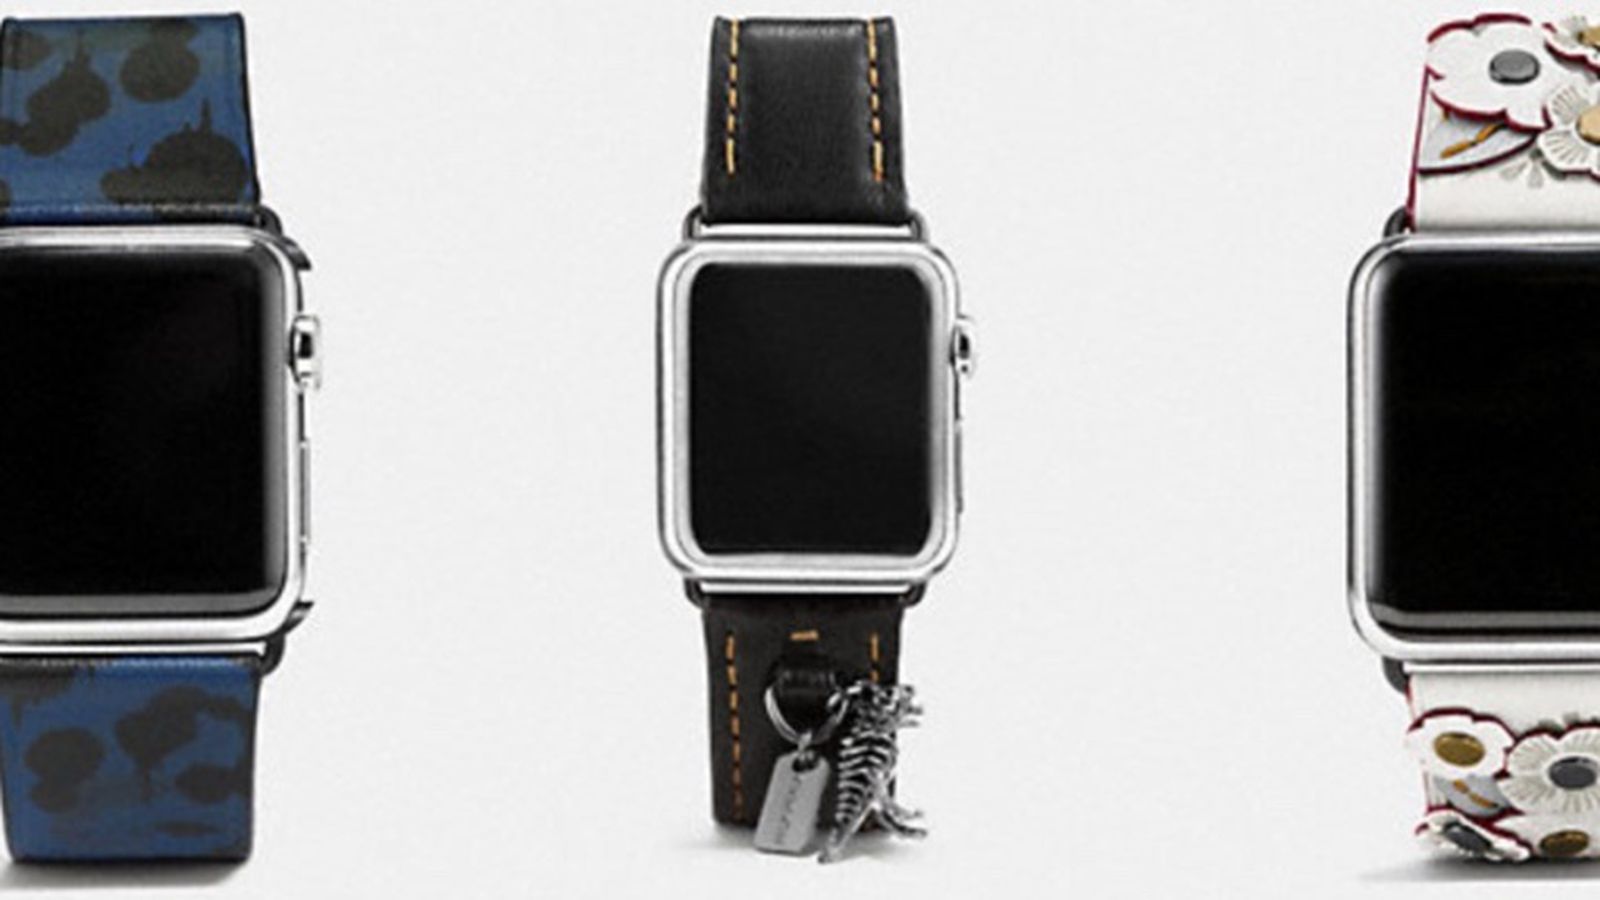 Coach Apple Watch Bands Set to Launch on June 12 - MacRumors